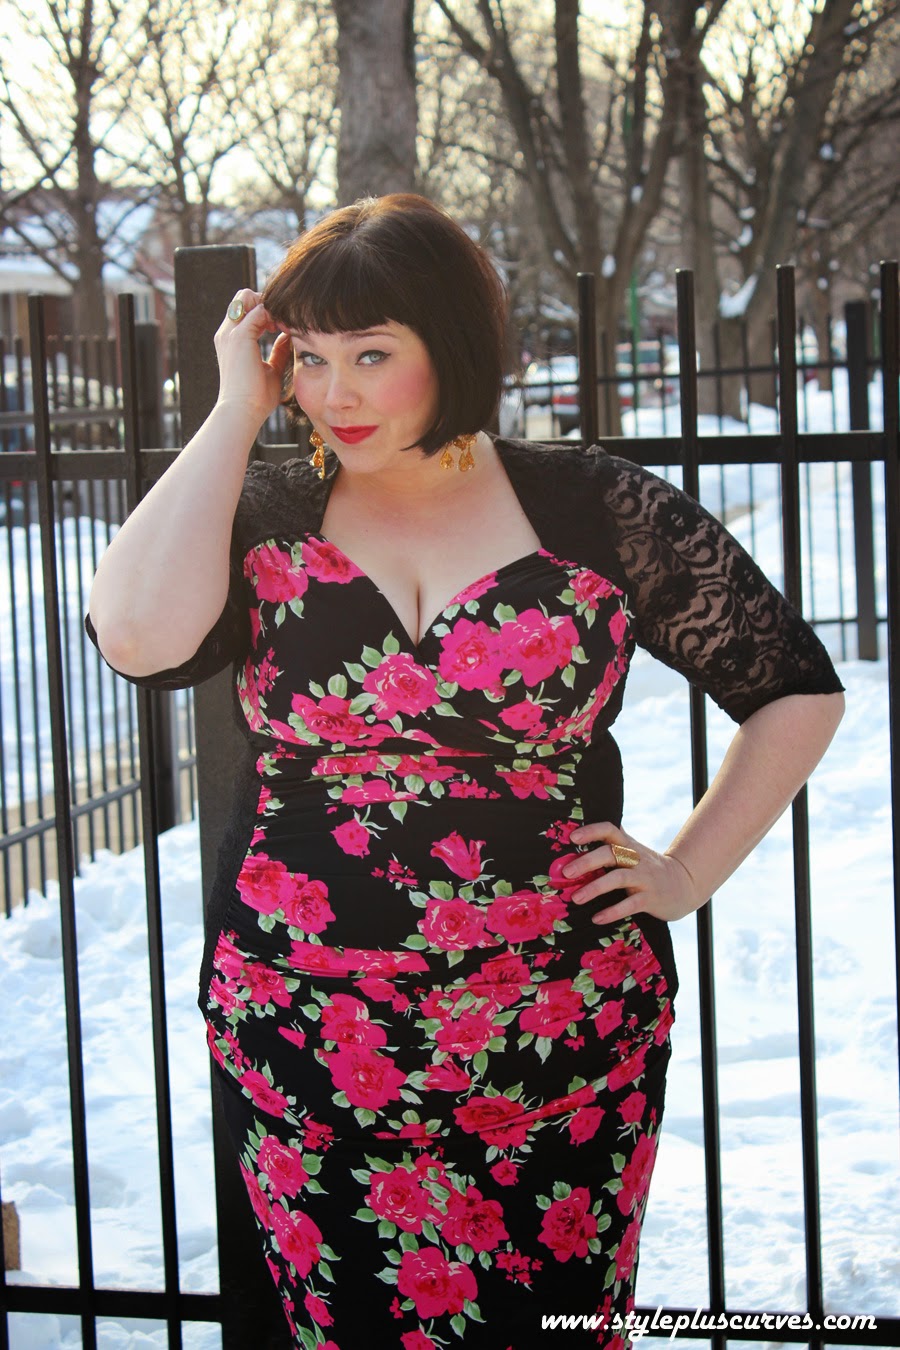 Svinde bort Definere th Plus Size Floral and Lace Dress From Kiyonna is VaVa-Voom!